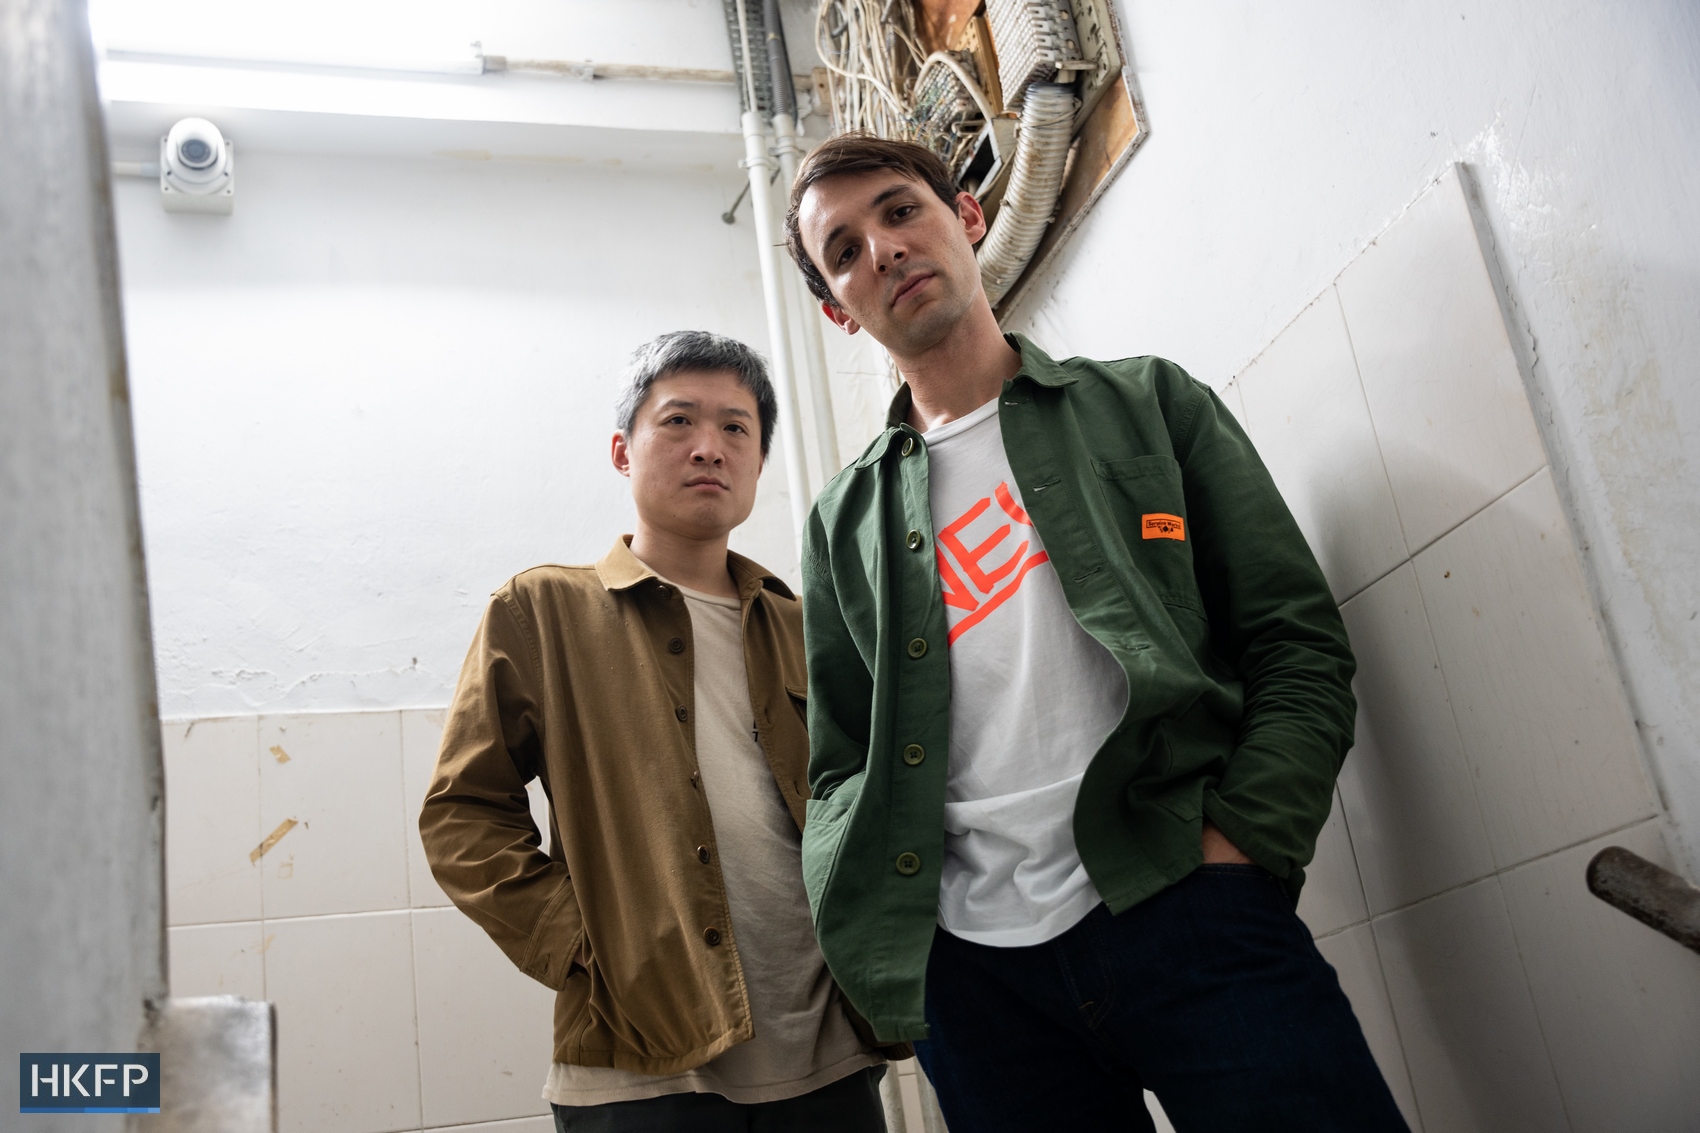 Tom Ng and Josh Frank - the two halves of post-punk outfit Gong Gong Gong - have arrived in Hong Kong to round out their 2023 China tour. Photo: Kyle Lam/HKFP.